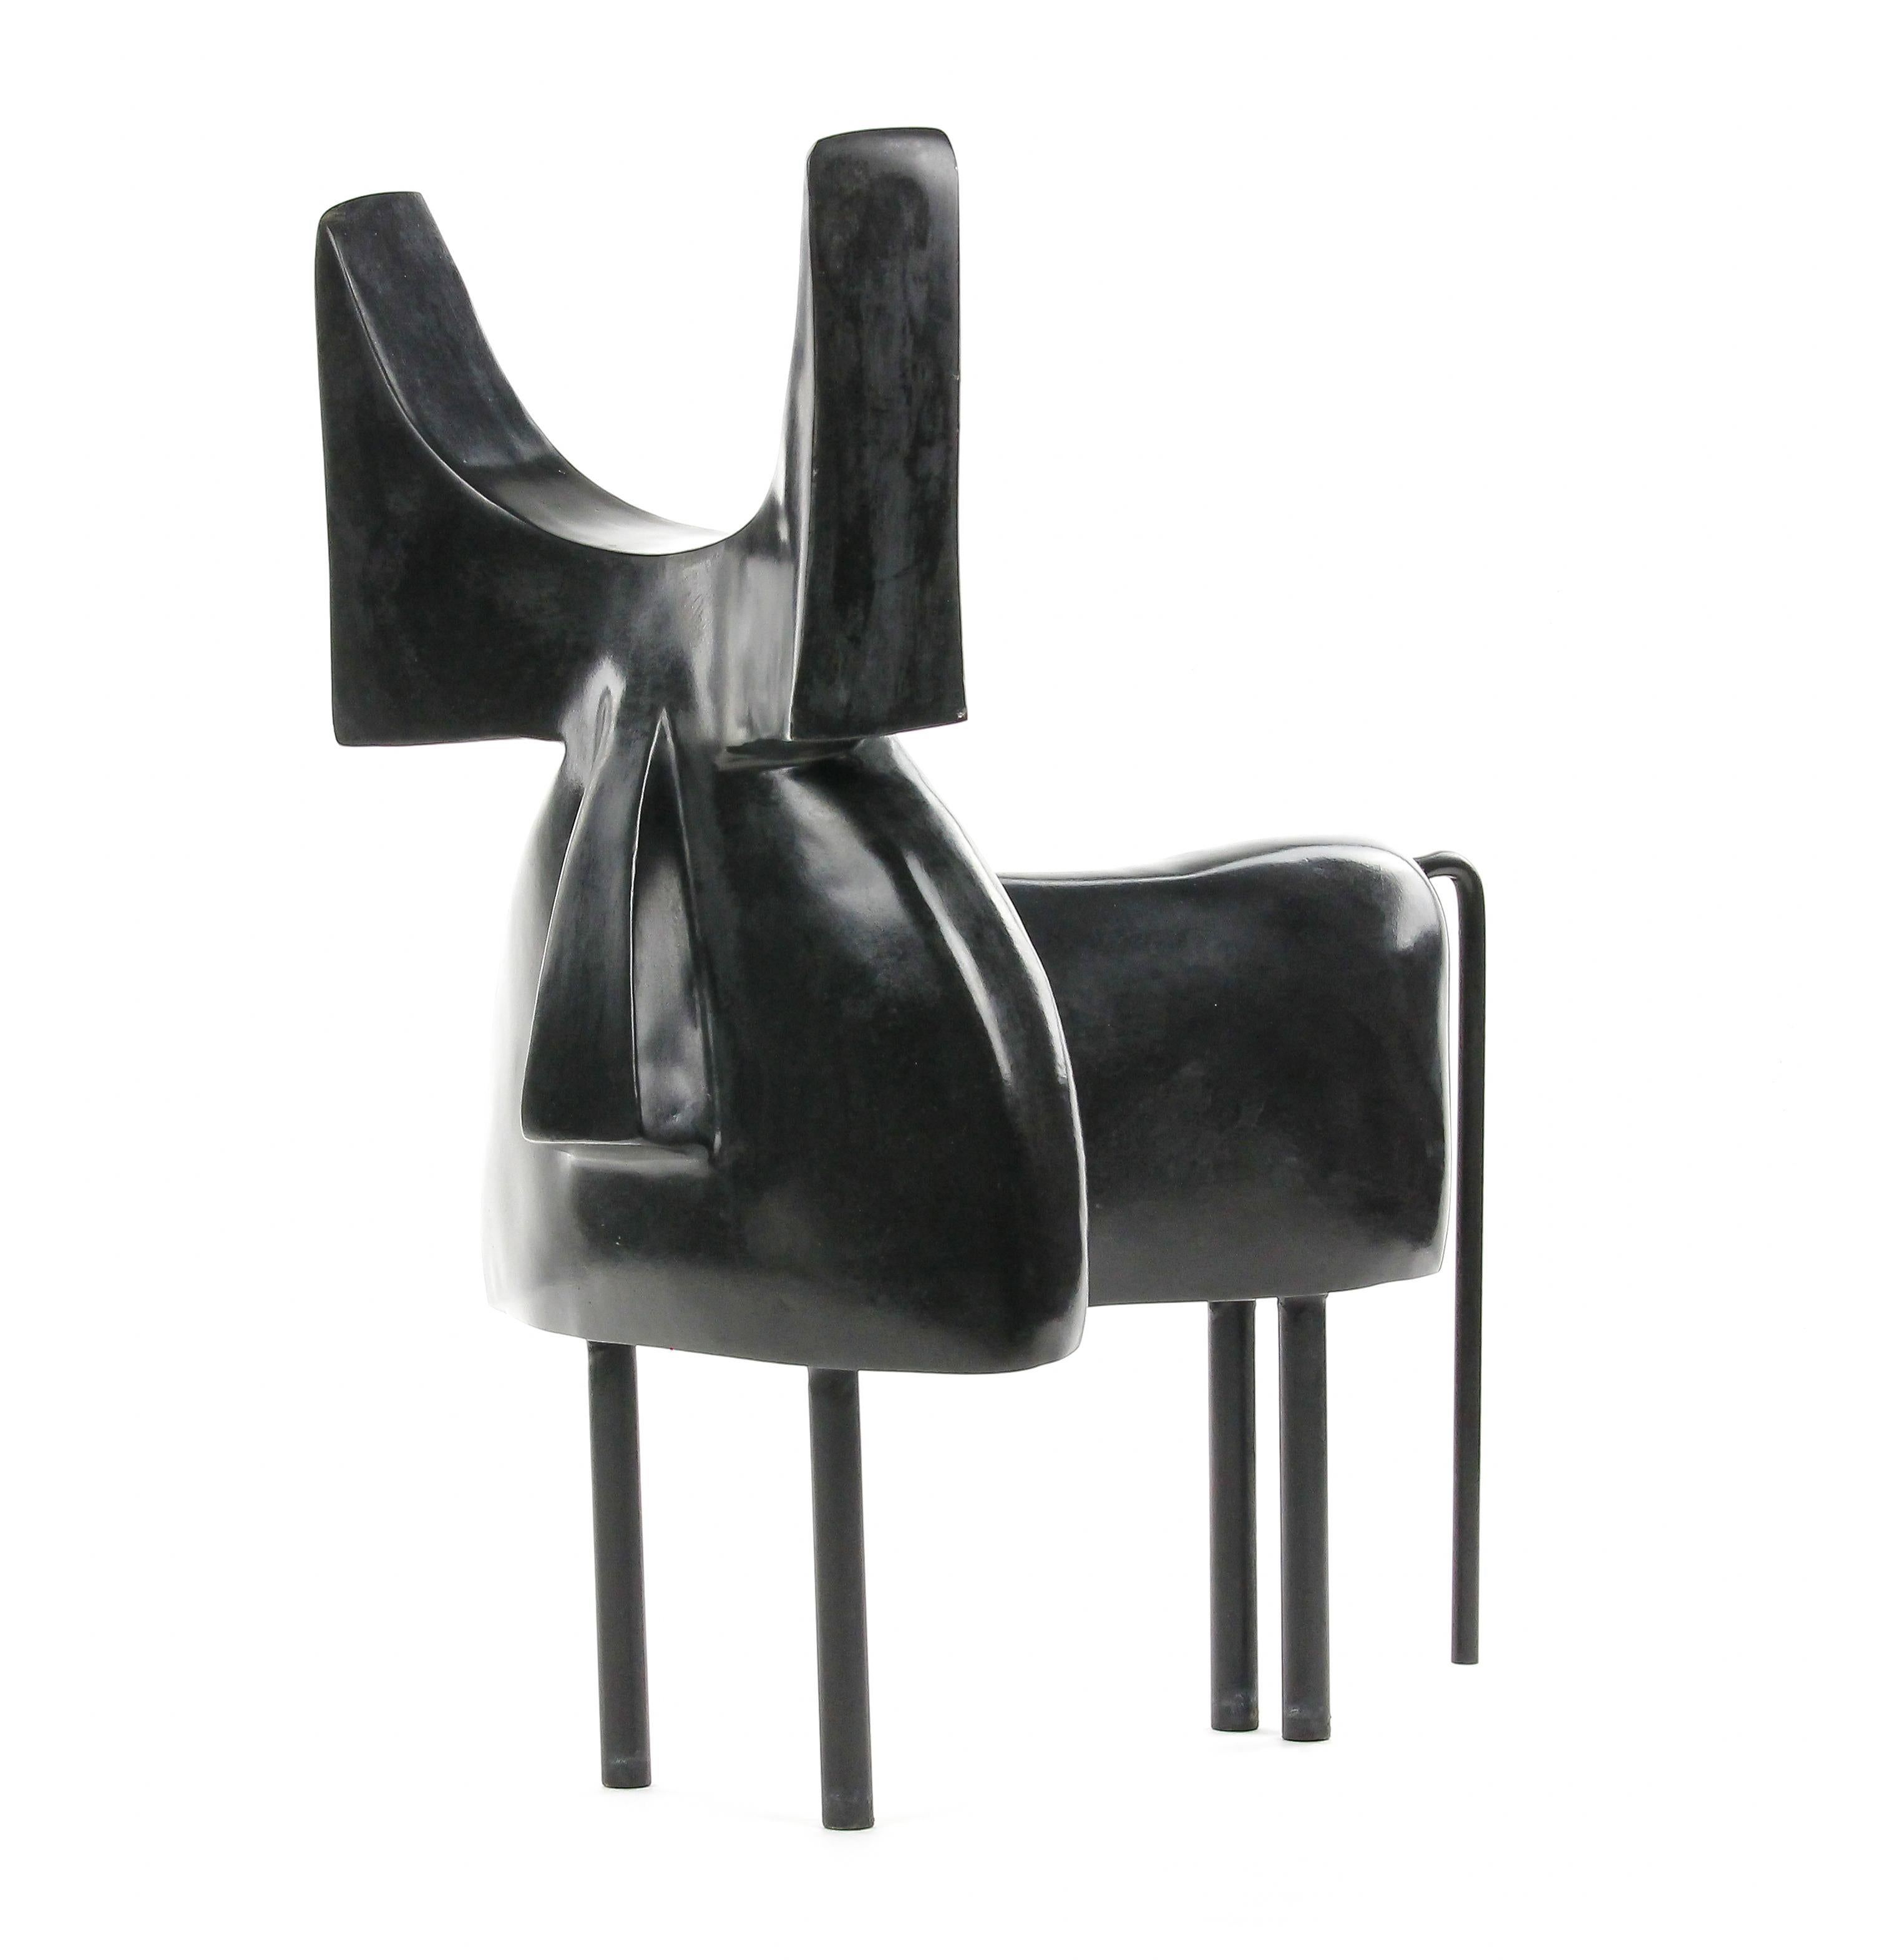 Pablo by Marie Louise Sorbac - Contemporary bronze sculpture, geometric bull For Sale 3